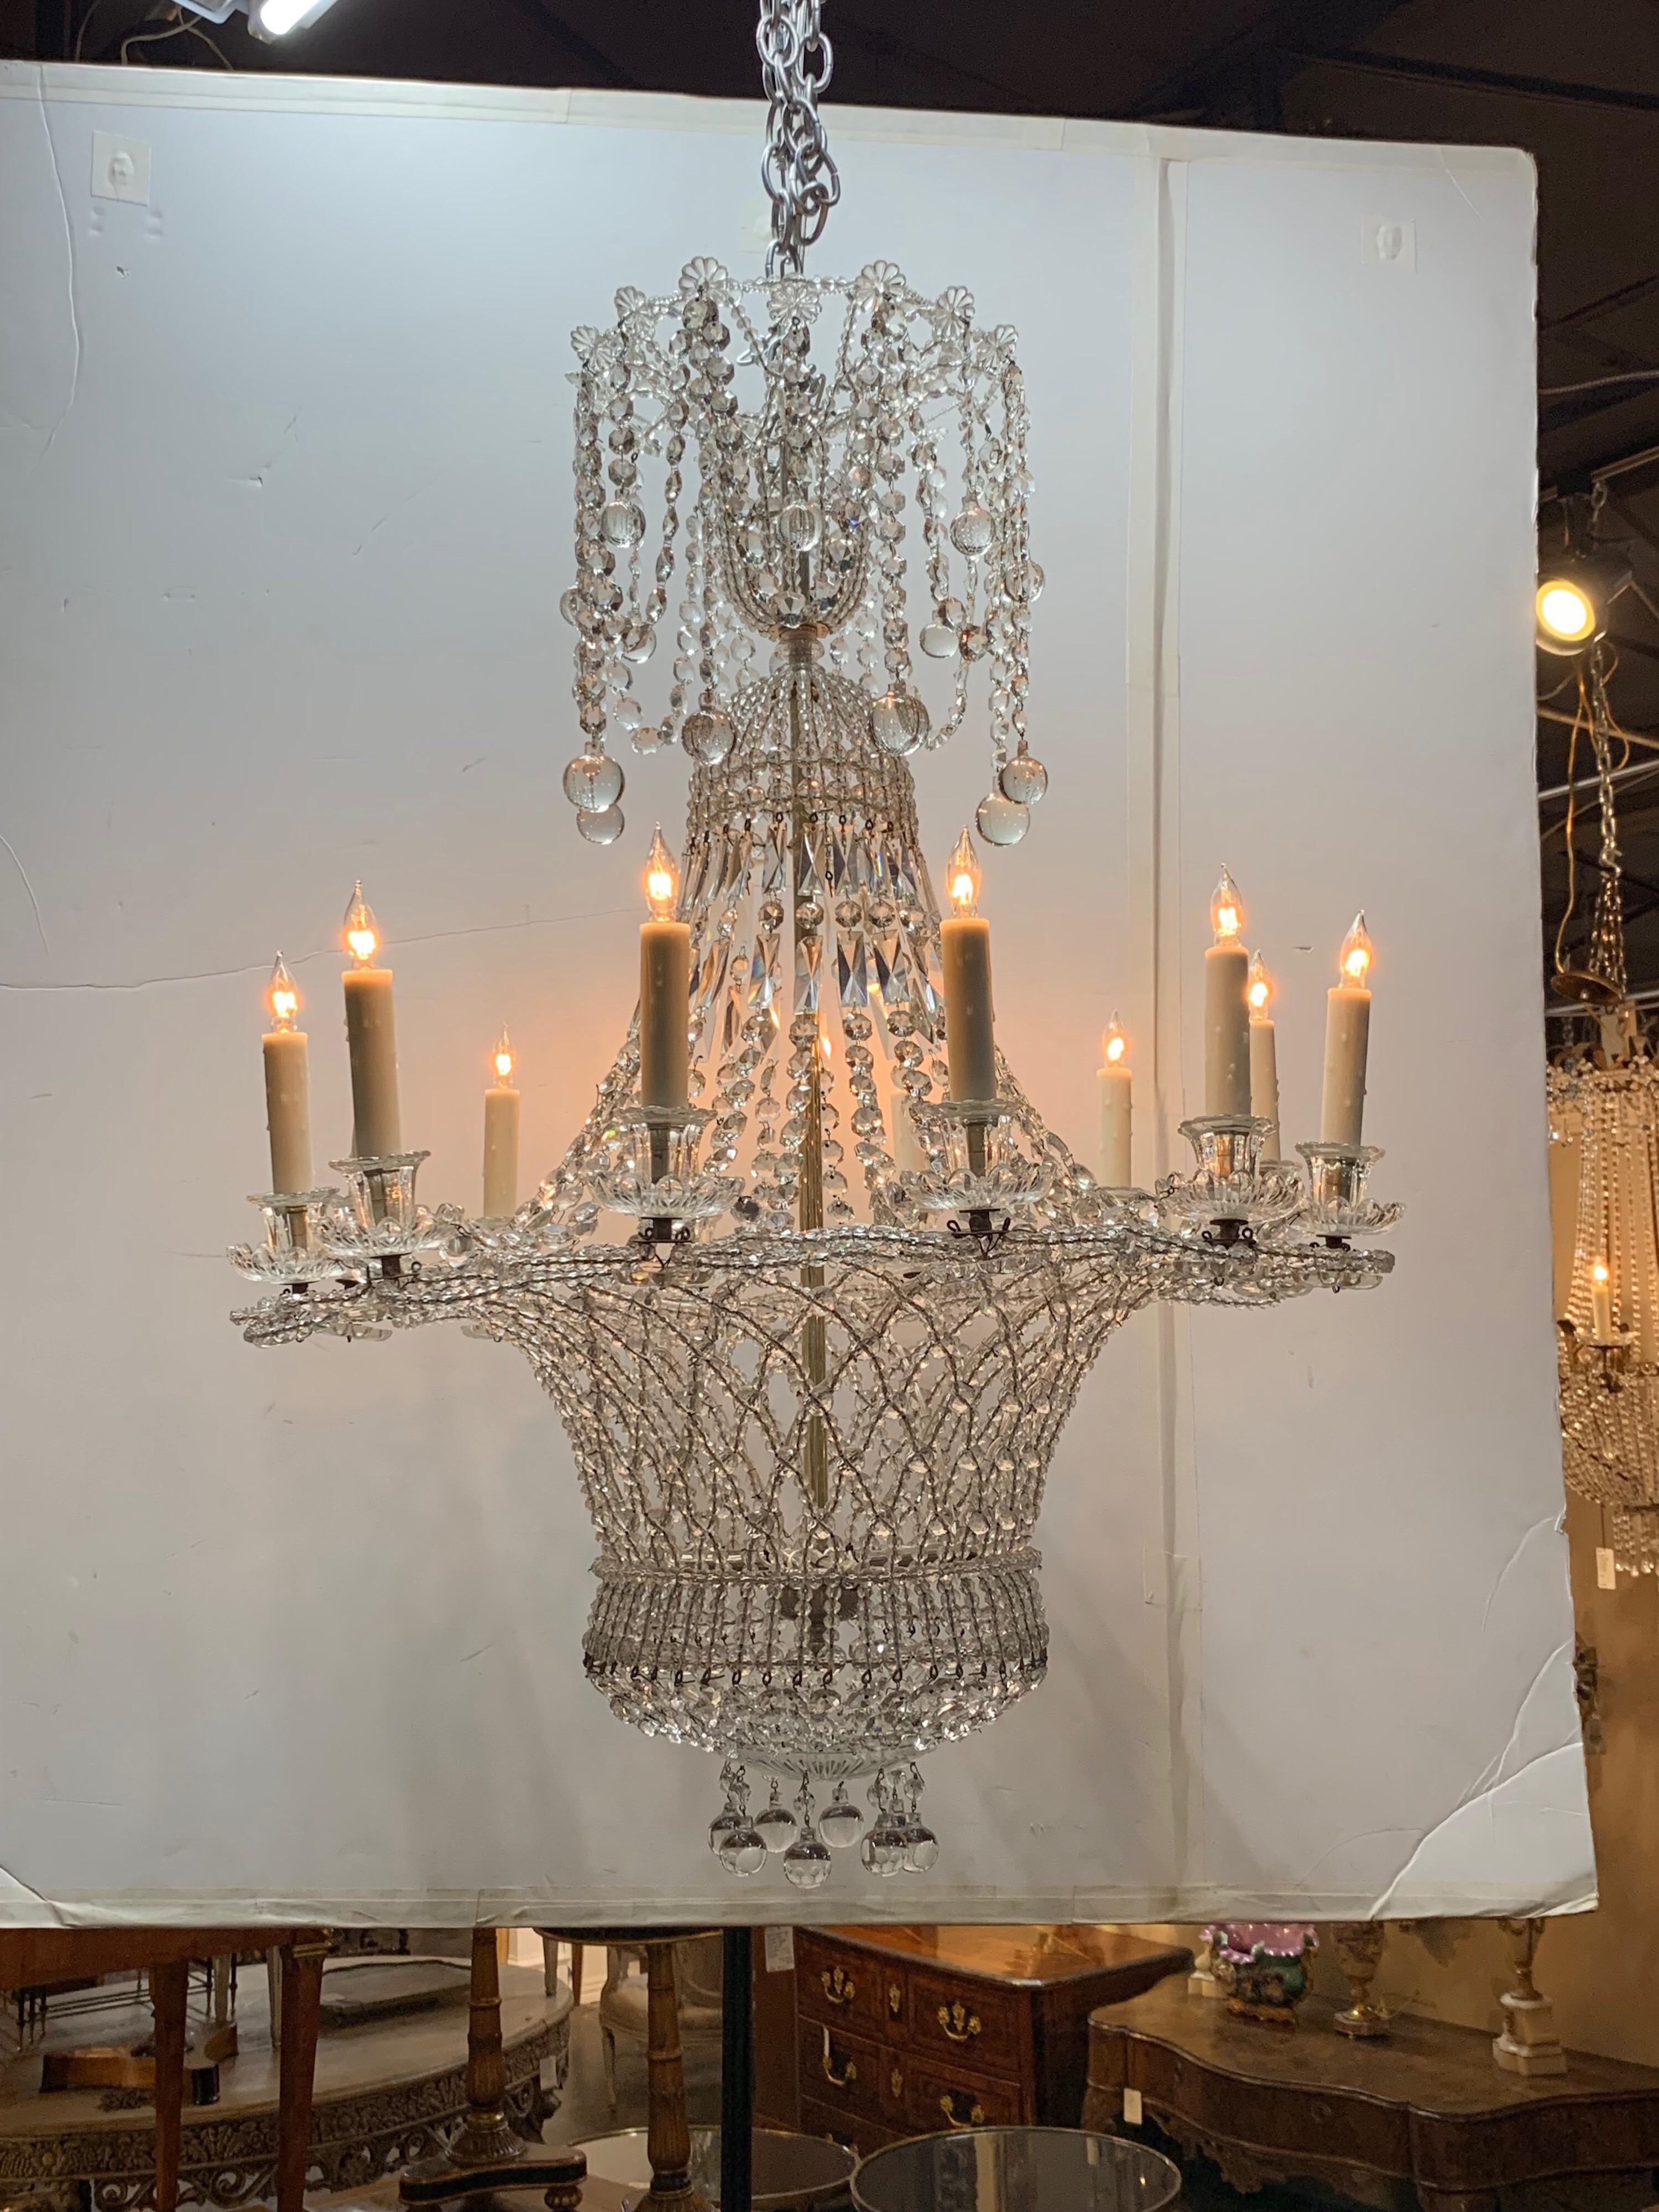 Lovely Italian beaded crystal basket form chandelier with 12 lights,

circa 1920.